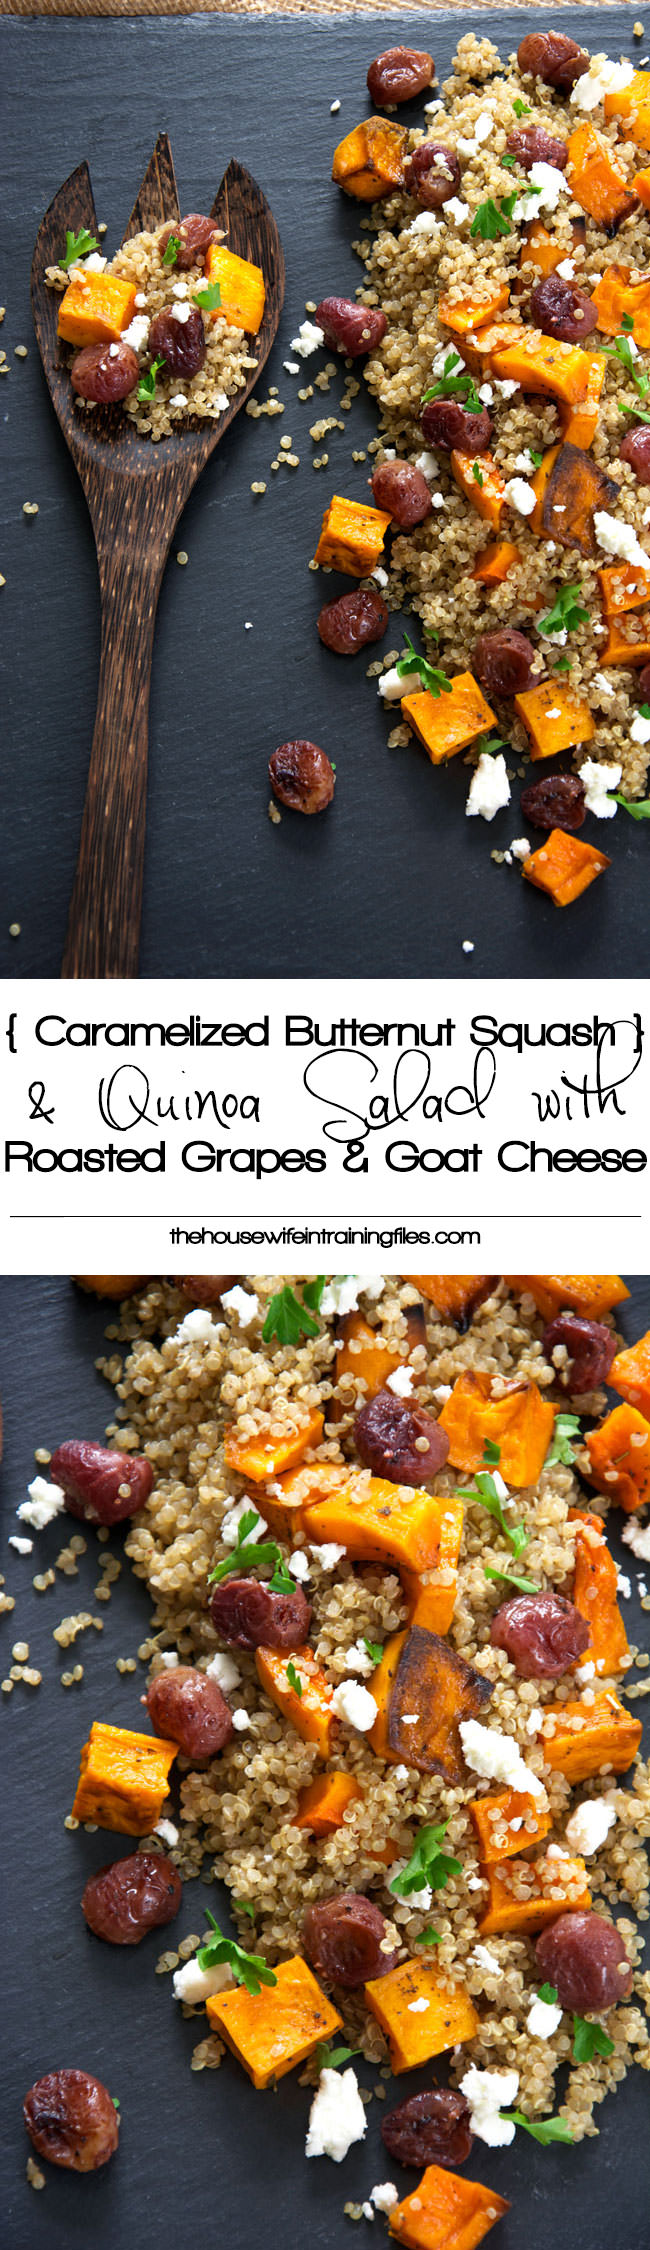 A delicious and flavorful quinoa salad made of caramelized butternut squash, creamy goat cheese, roasted grapes and basil! Make ahead and store in the fridge until ready to serve!